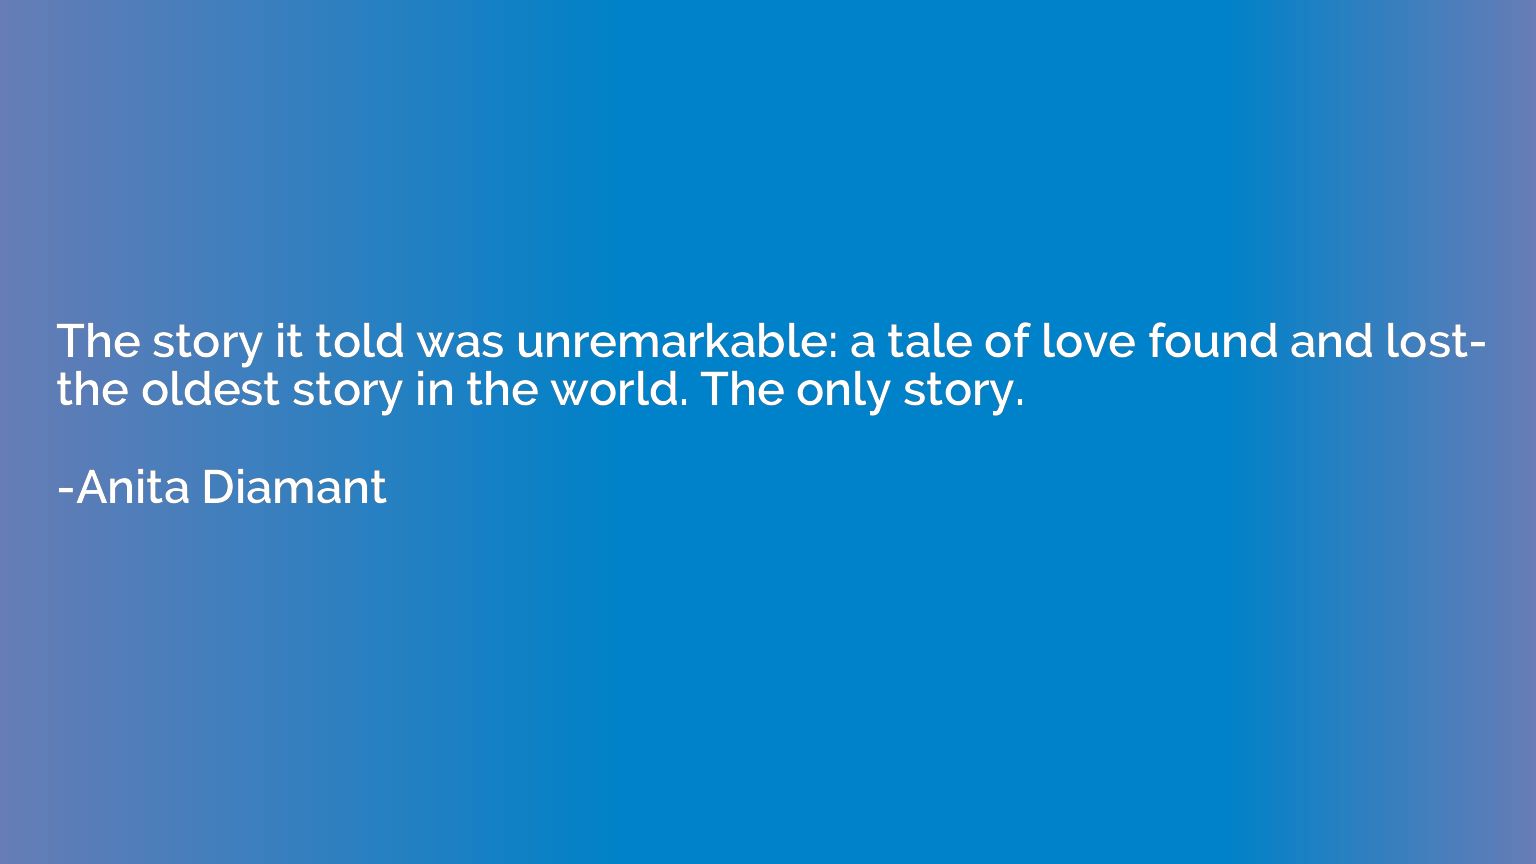 The story it told was unremarkable: a tale of love found and